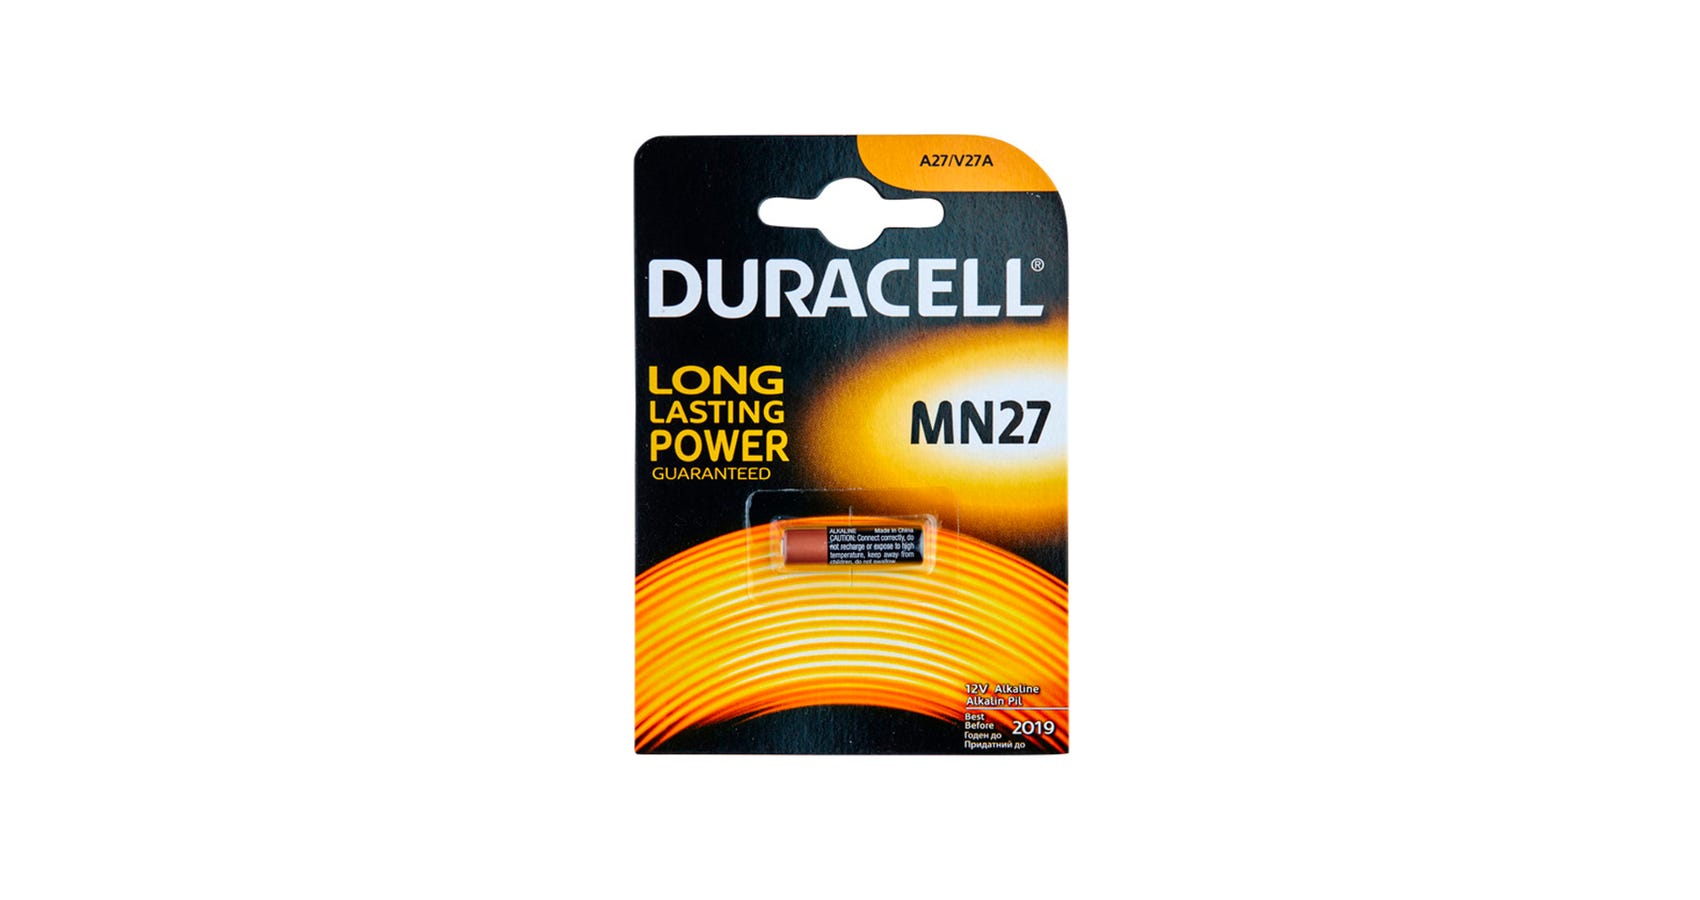  A27 12V Battery 1 pc - Buy here - Sinful.com